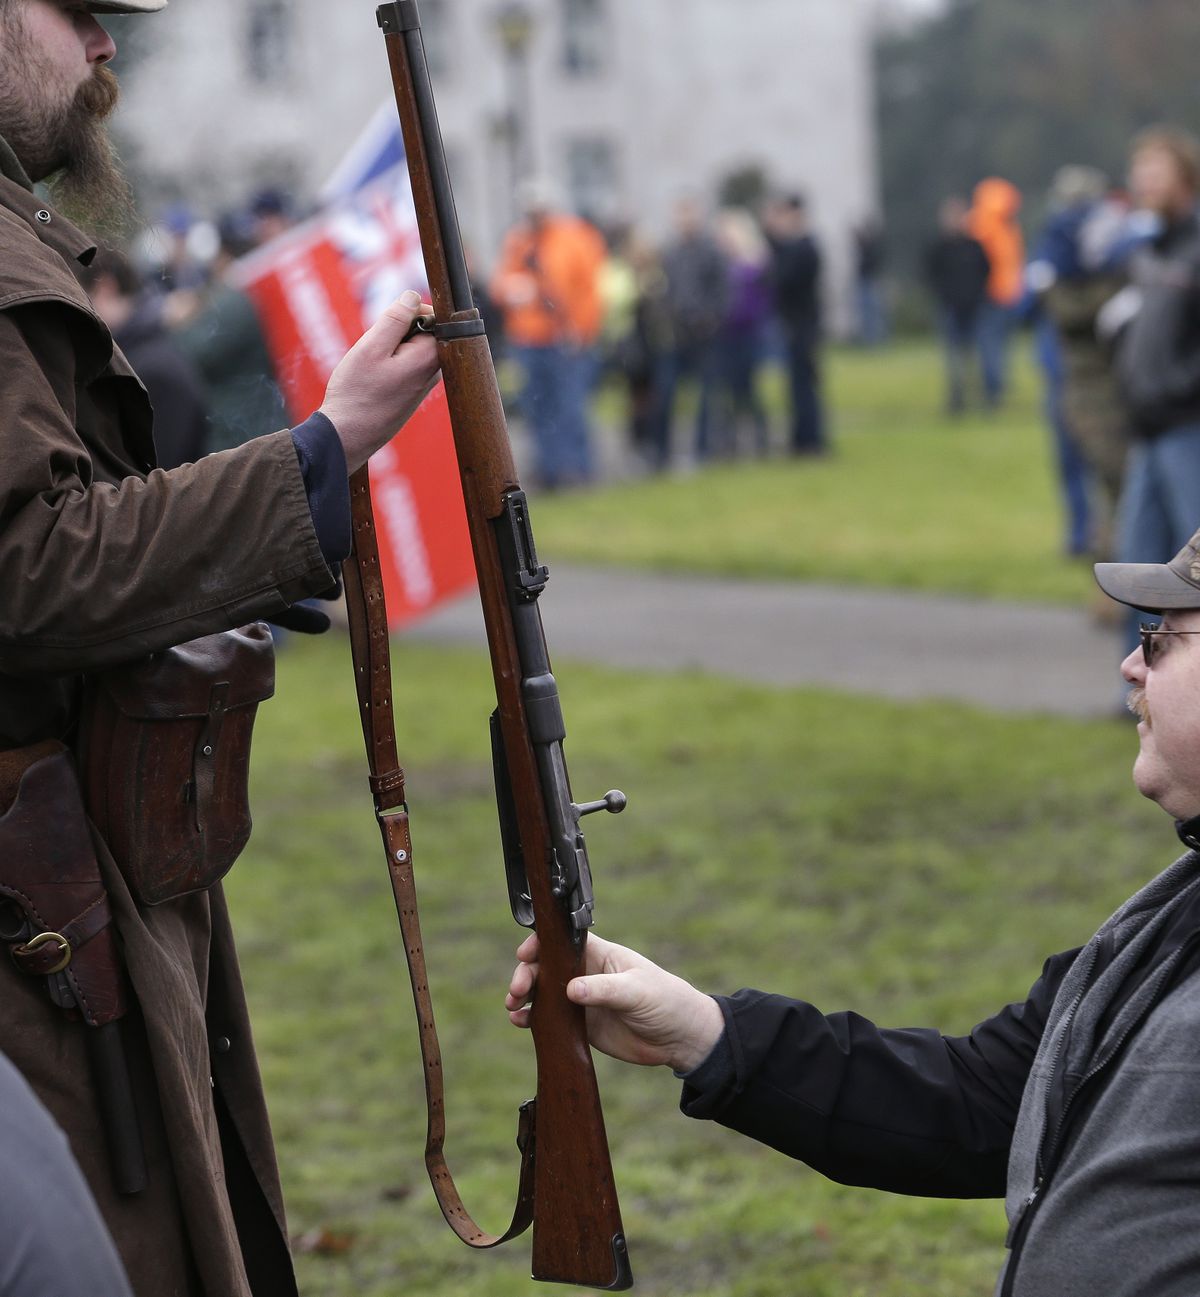 Demonstrators hand off a gun between them during a rally by gun-rights advocates to protest a new expanded gun background check law in Washington on Saturday in Olympia. (Associated Press)